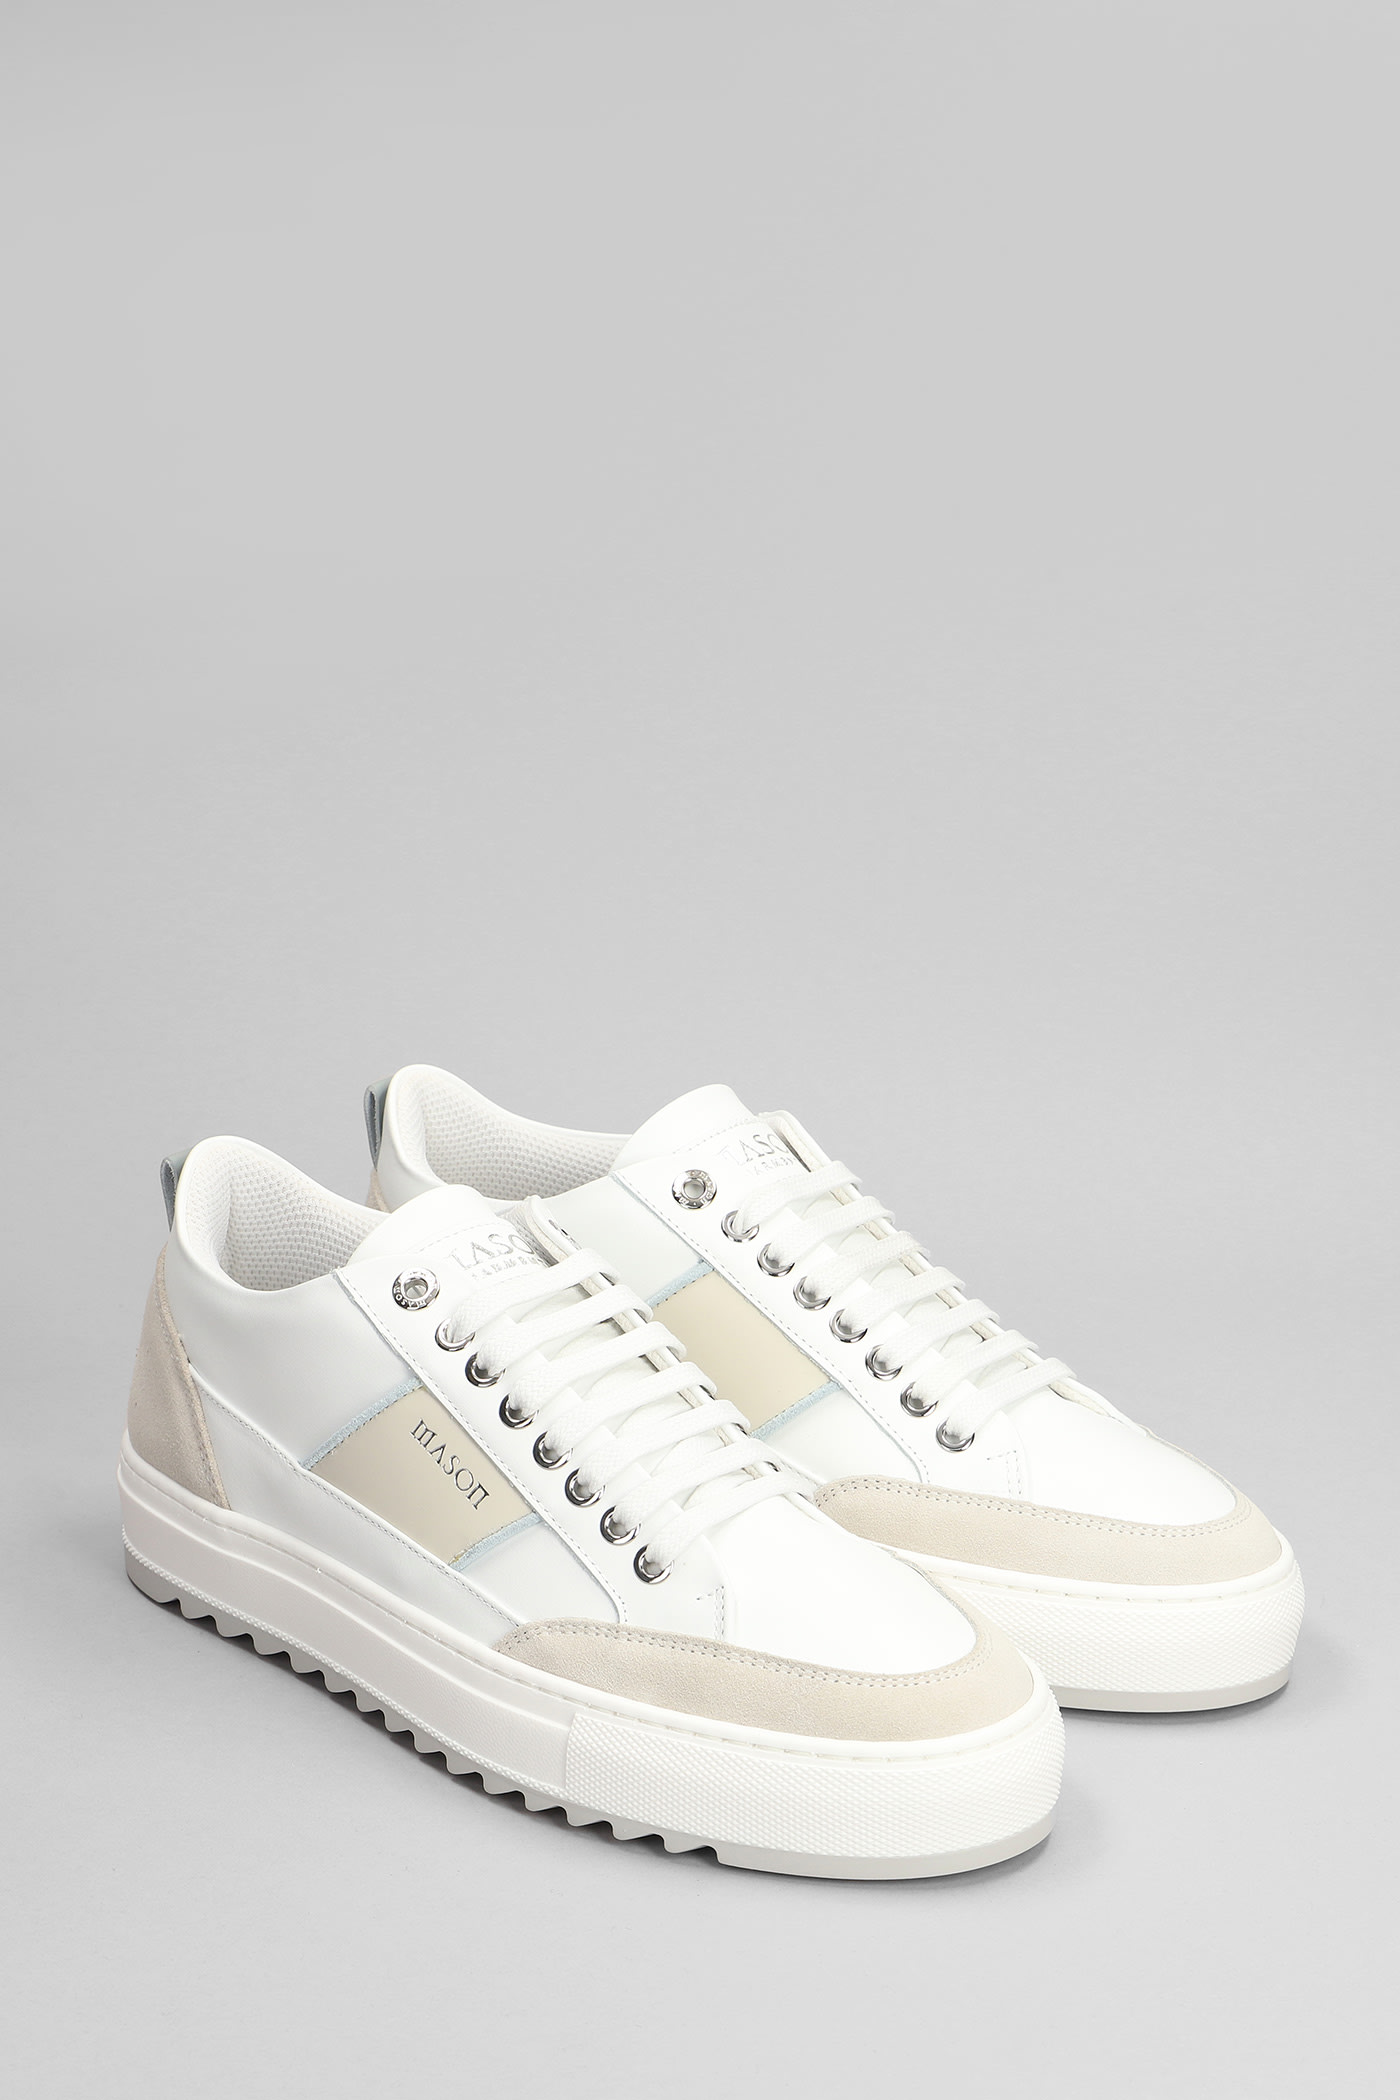 Shop Mason Garments Tia Sneakers In White Suede And Leather